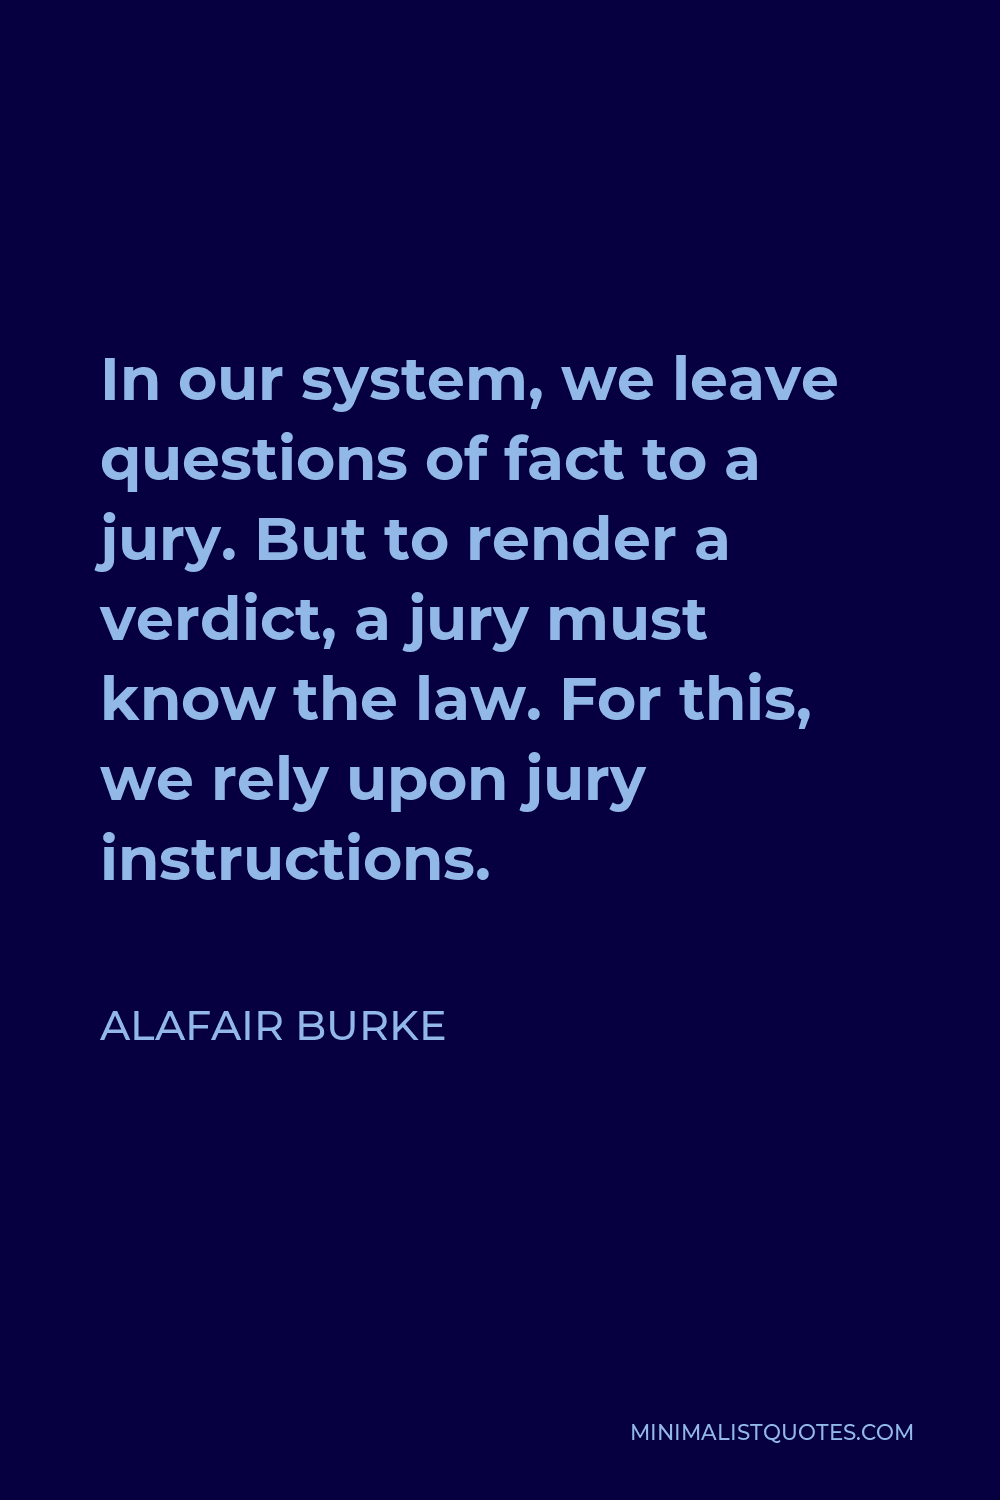 Alafair Burke Quote - In our system, we leave questions of fact to a jury. But to render a verdict, a jury must know the law. For this, we rely upon jury instructions.